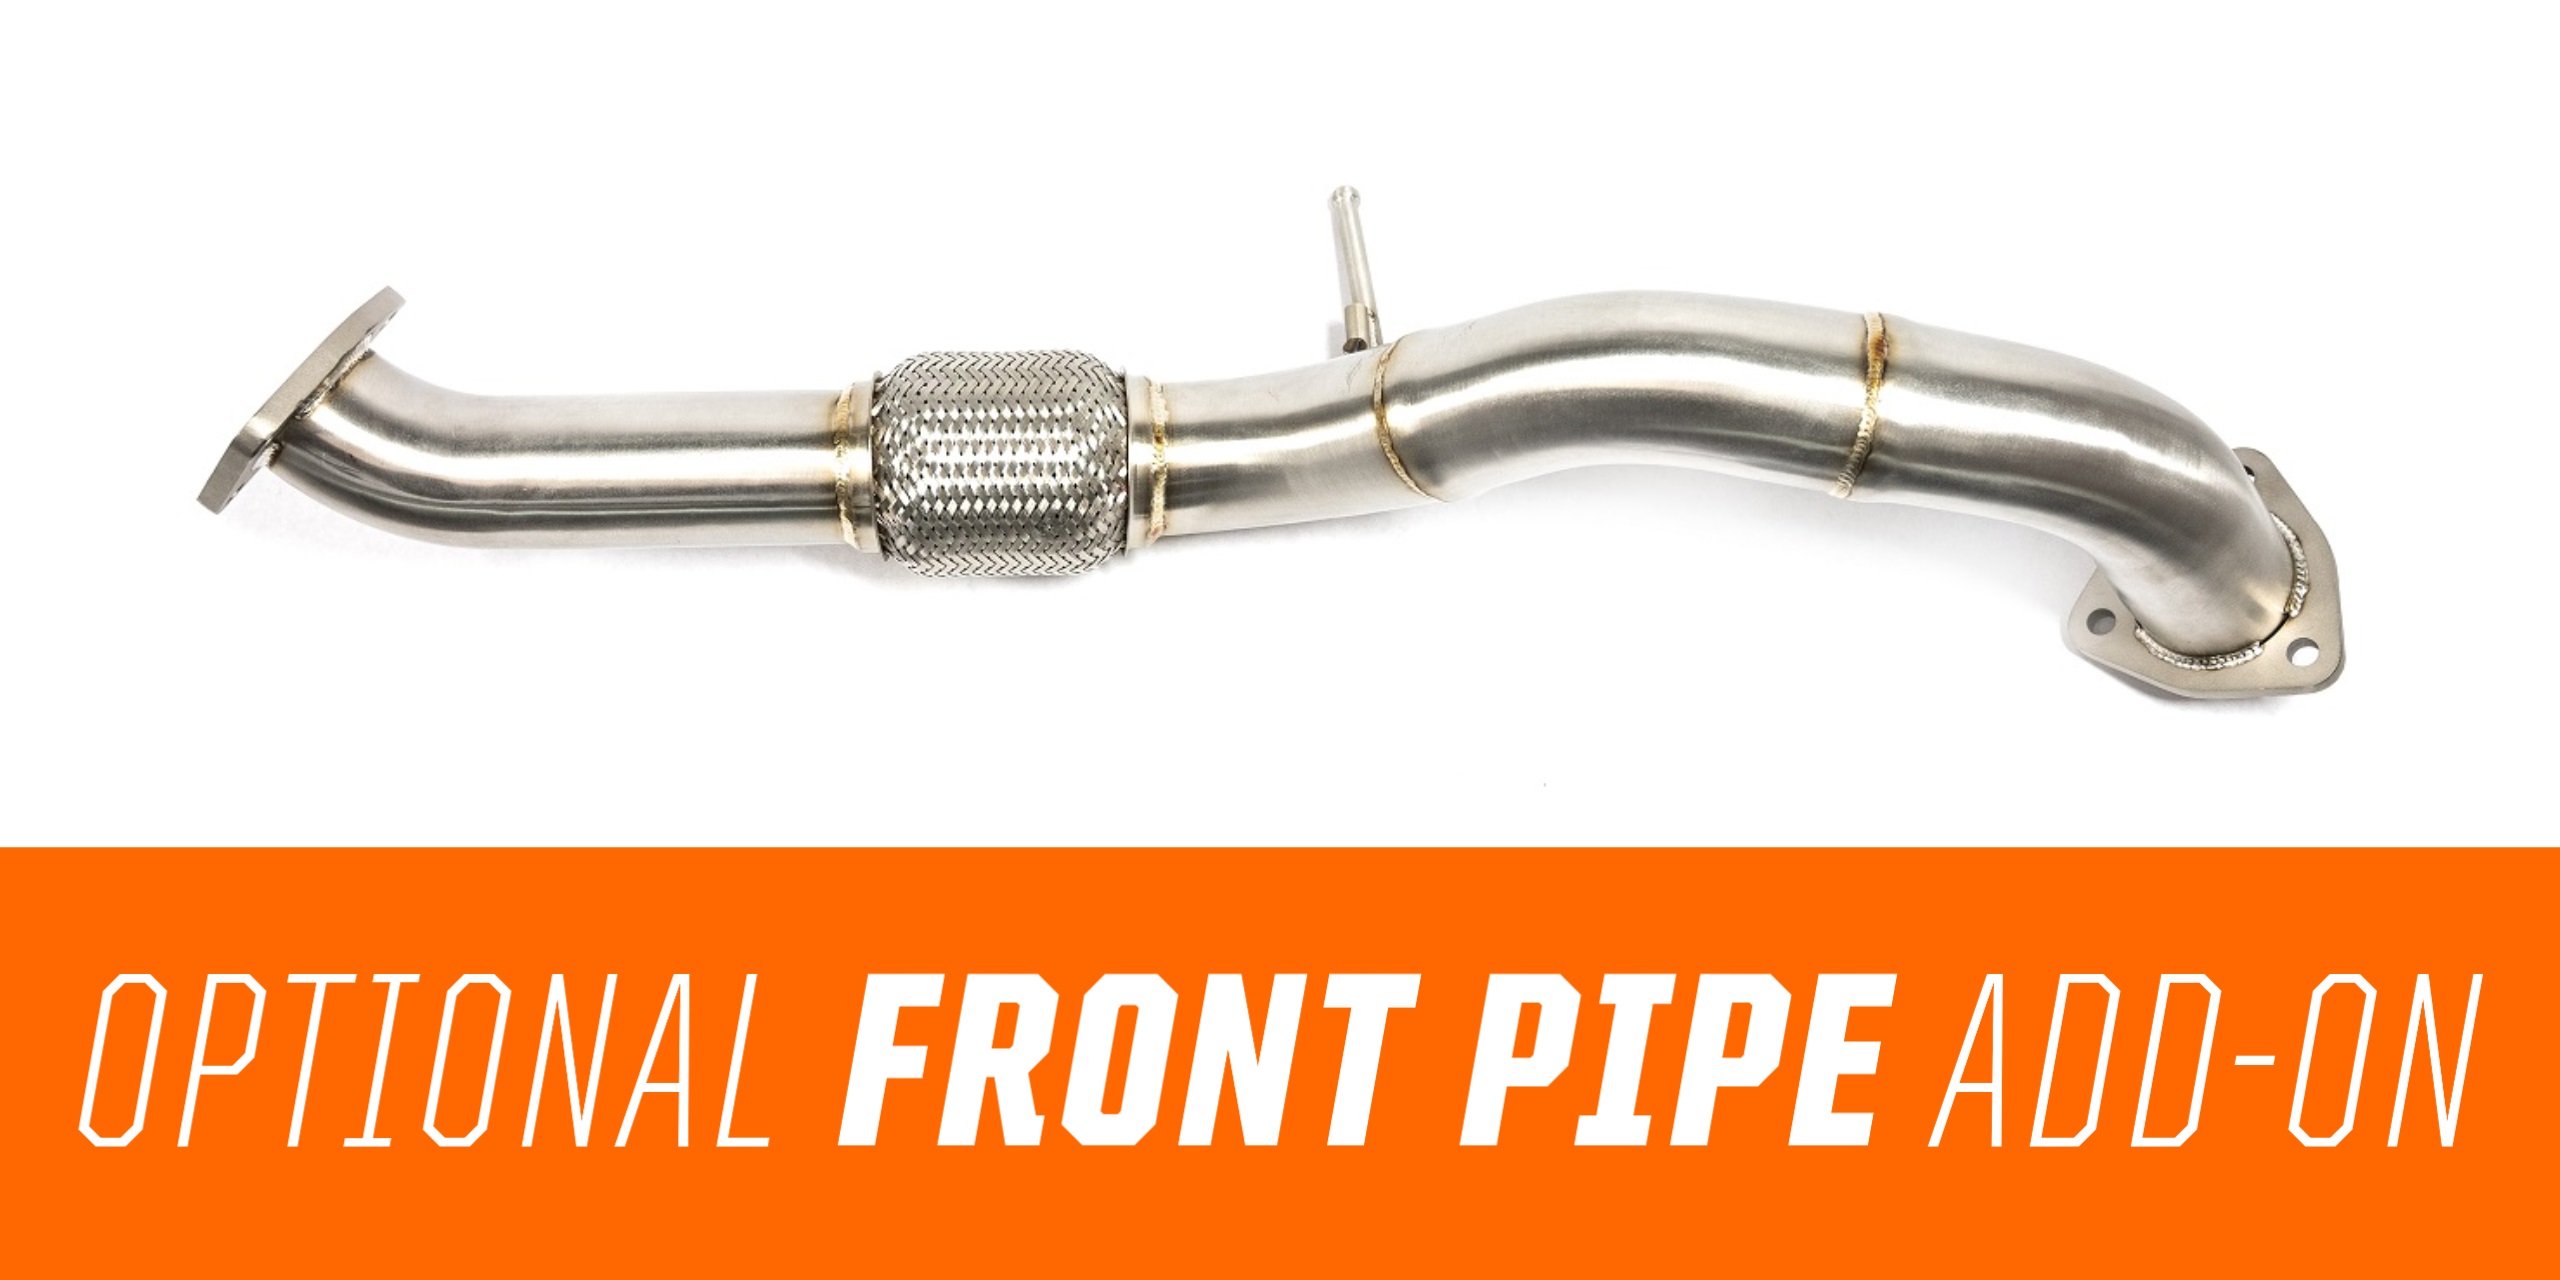 Located after your down-pipe our optional front-pipe will help complete your system